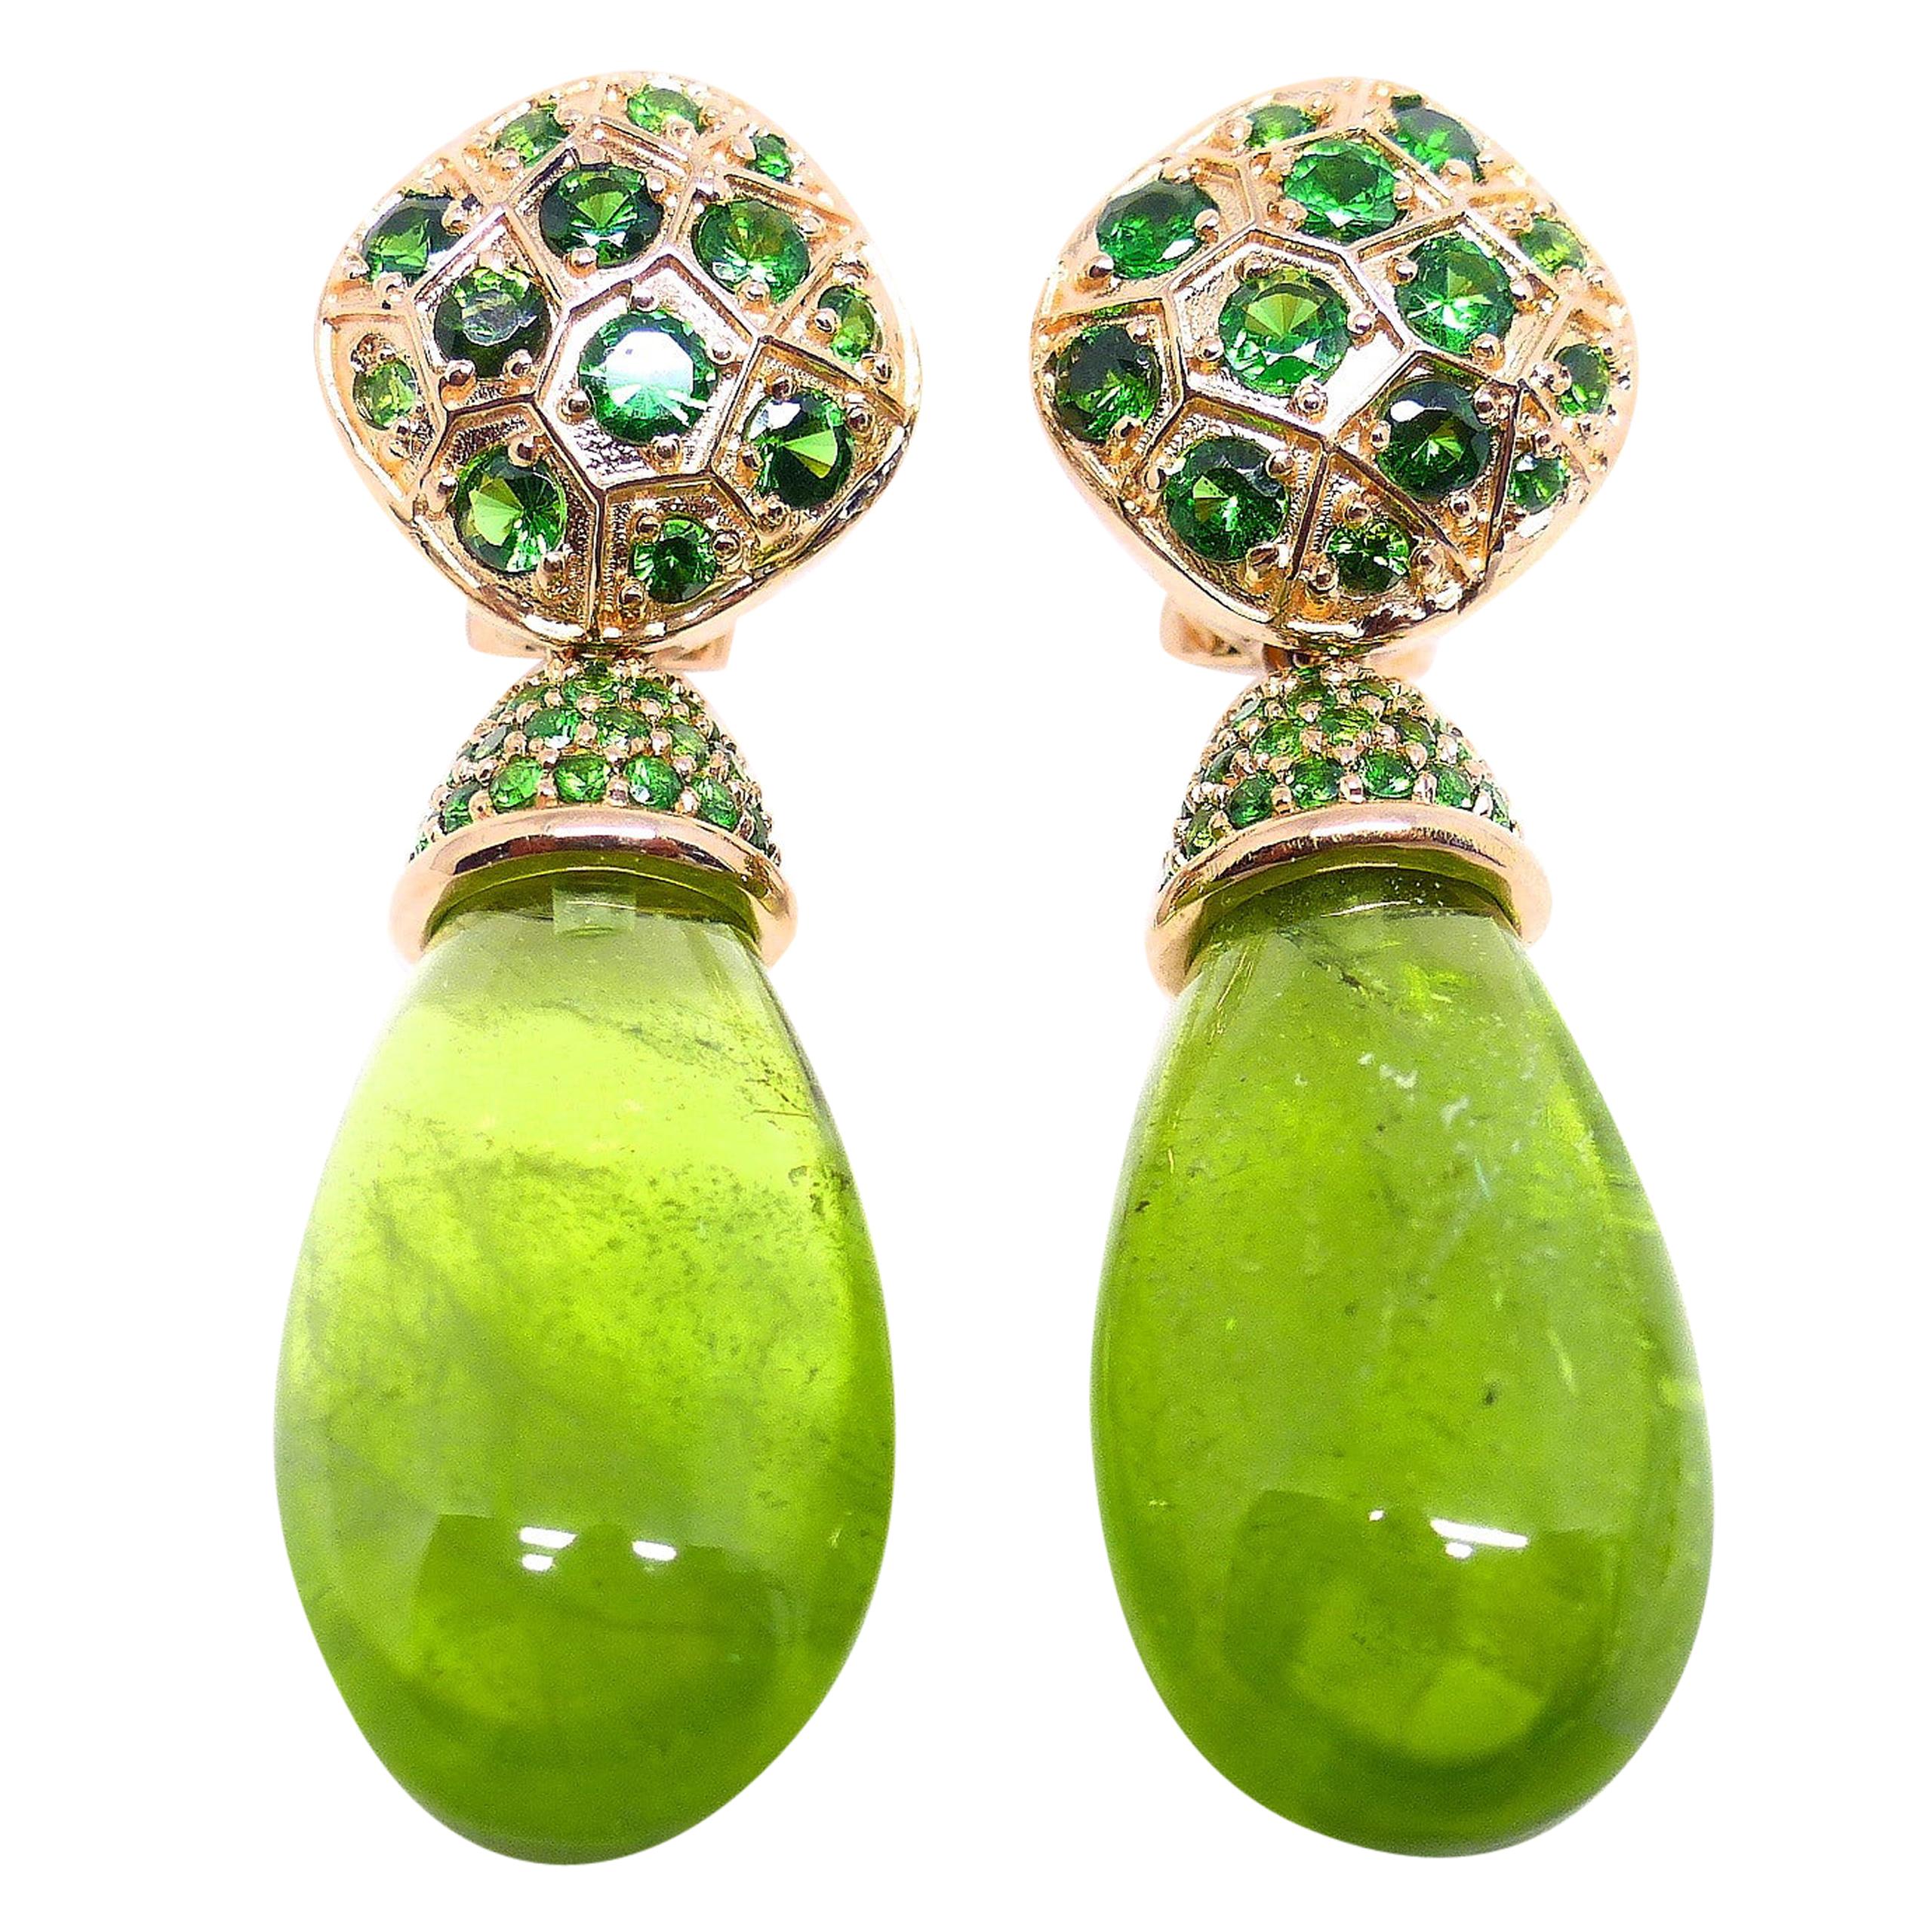 Earrings in Red Gold with 2 Peridots Brioletts and Tsavorites.